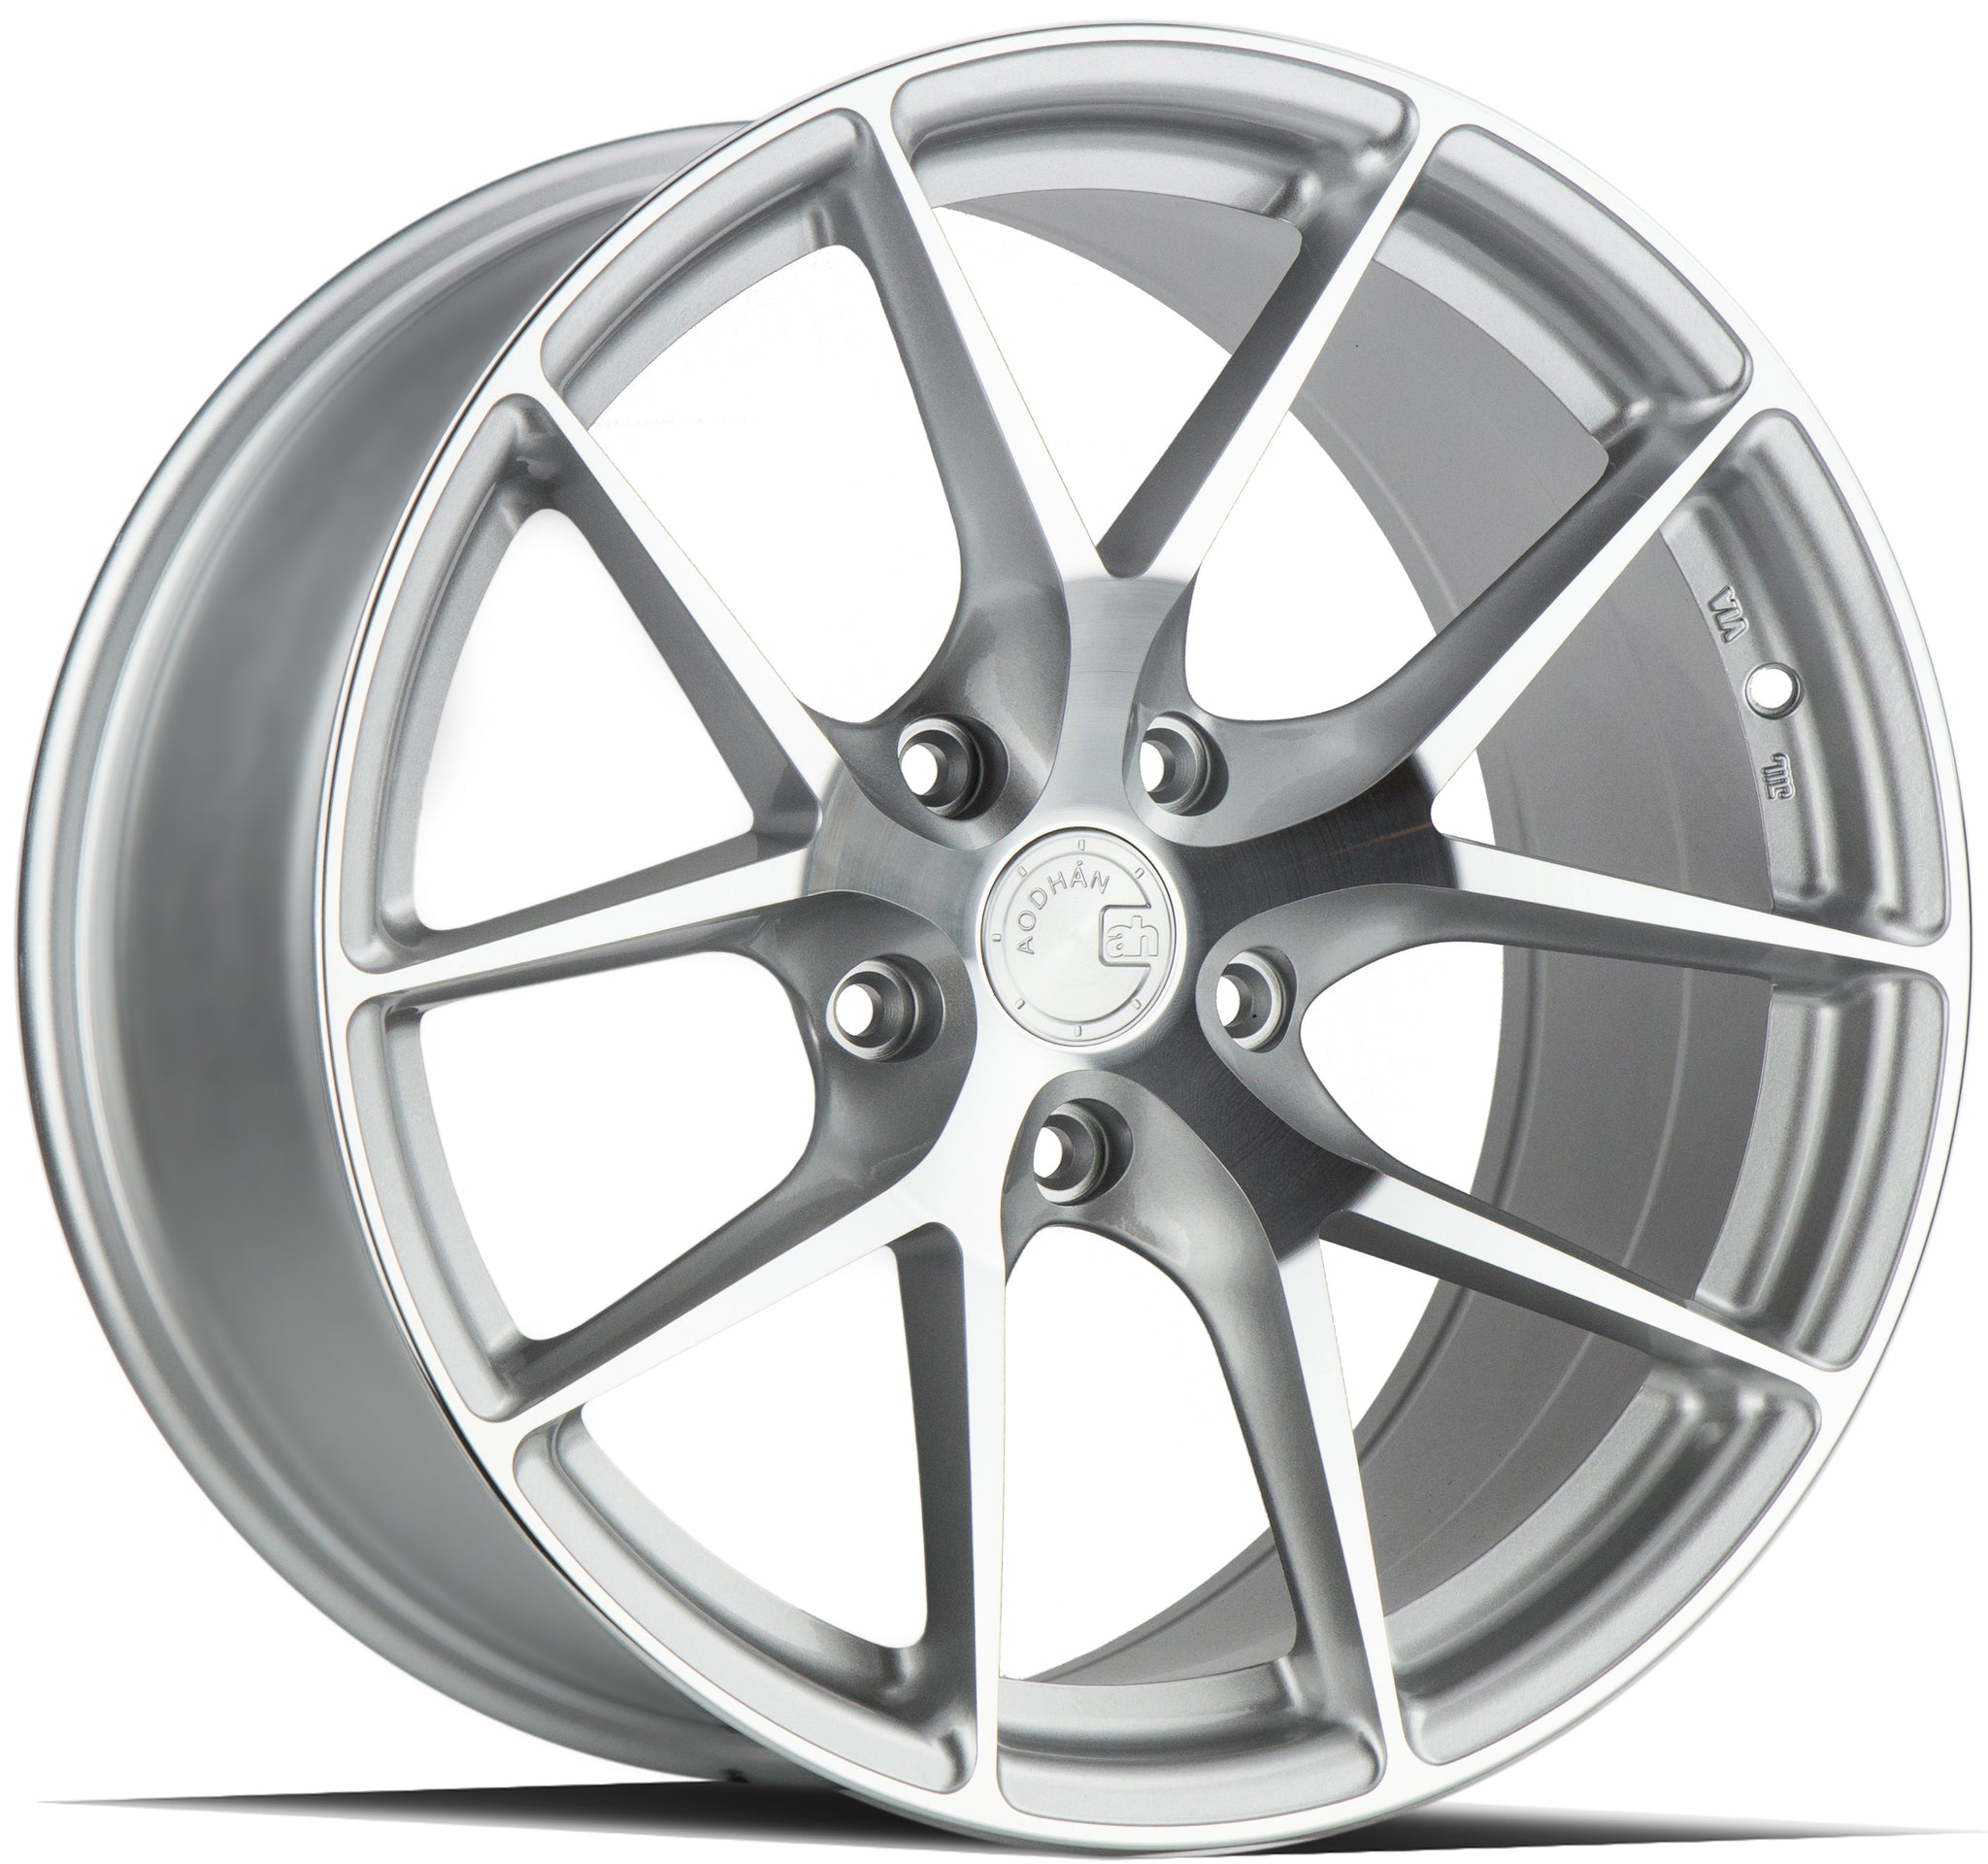 AODHAN AFF7 SILVER WITH MACHINED FACE WHEELS | 20X10.5 | 5X120 | OFFSET: 35MM | CB: 72.6MM